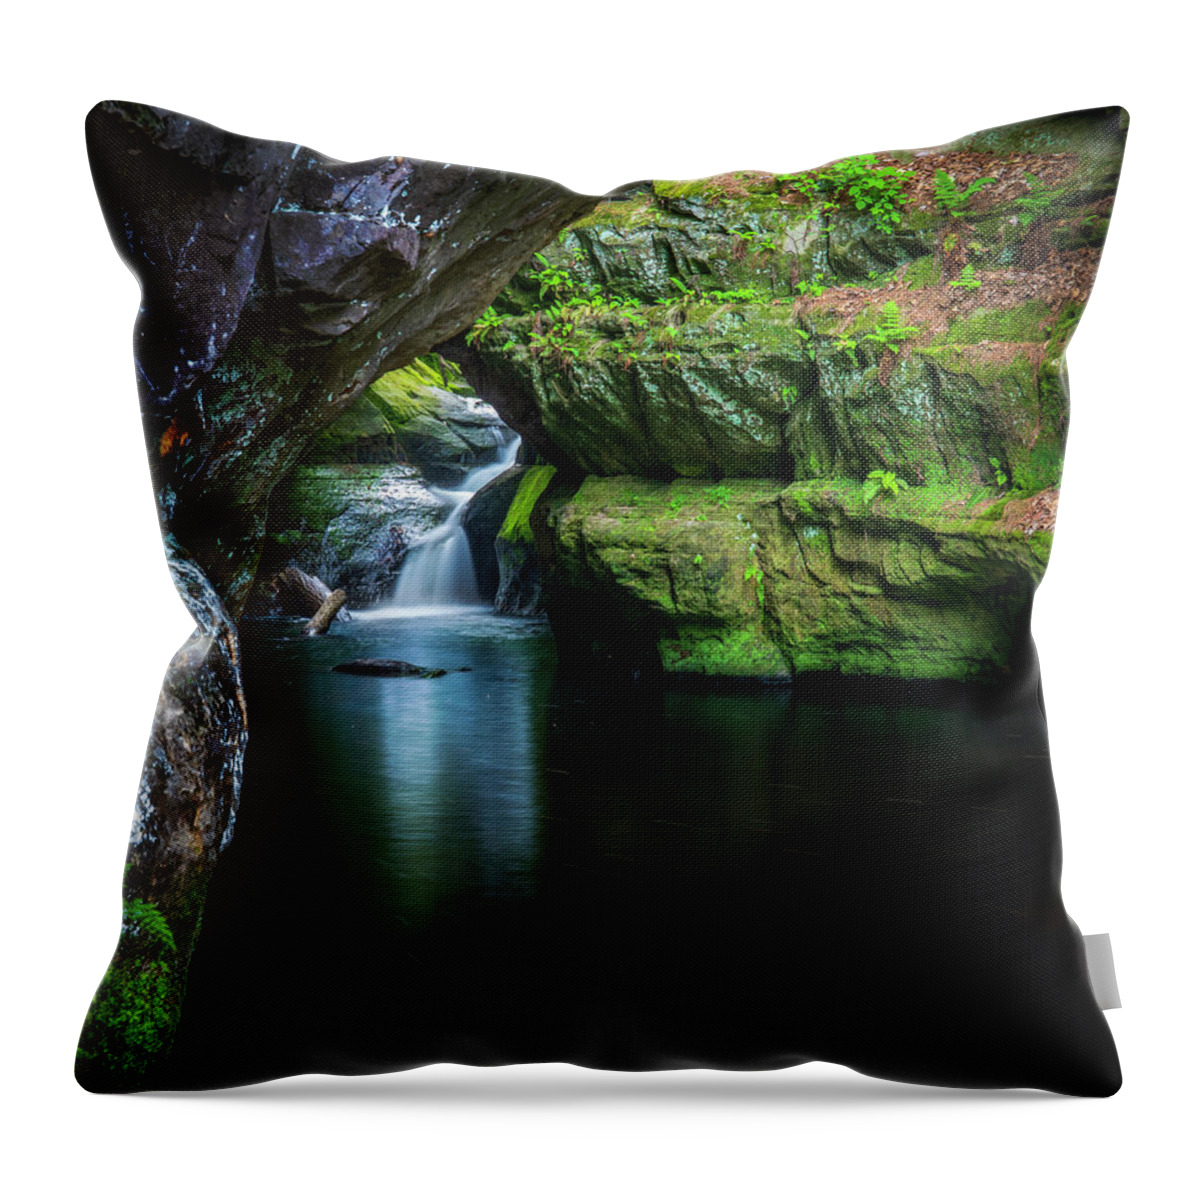 Pewits Nest Gorge Throw Pillow featuring the photograph Pewits Nest Waterfall by Dan Sproul